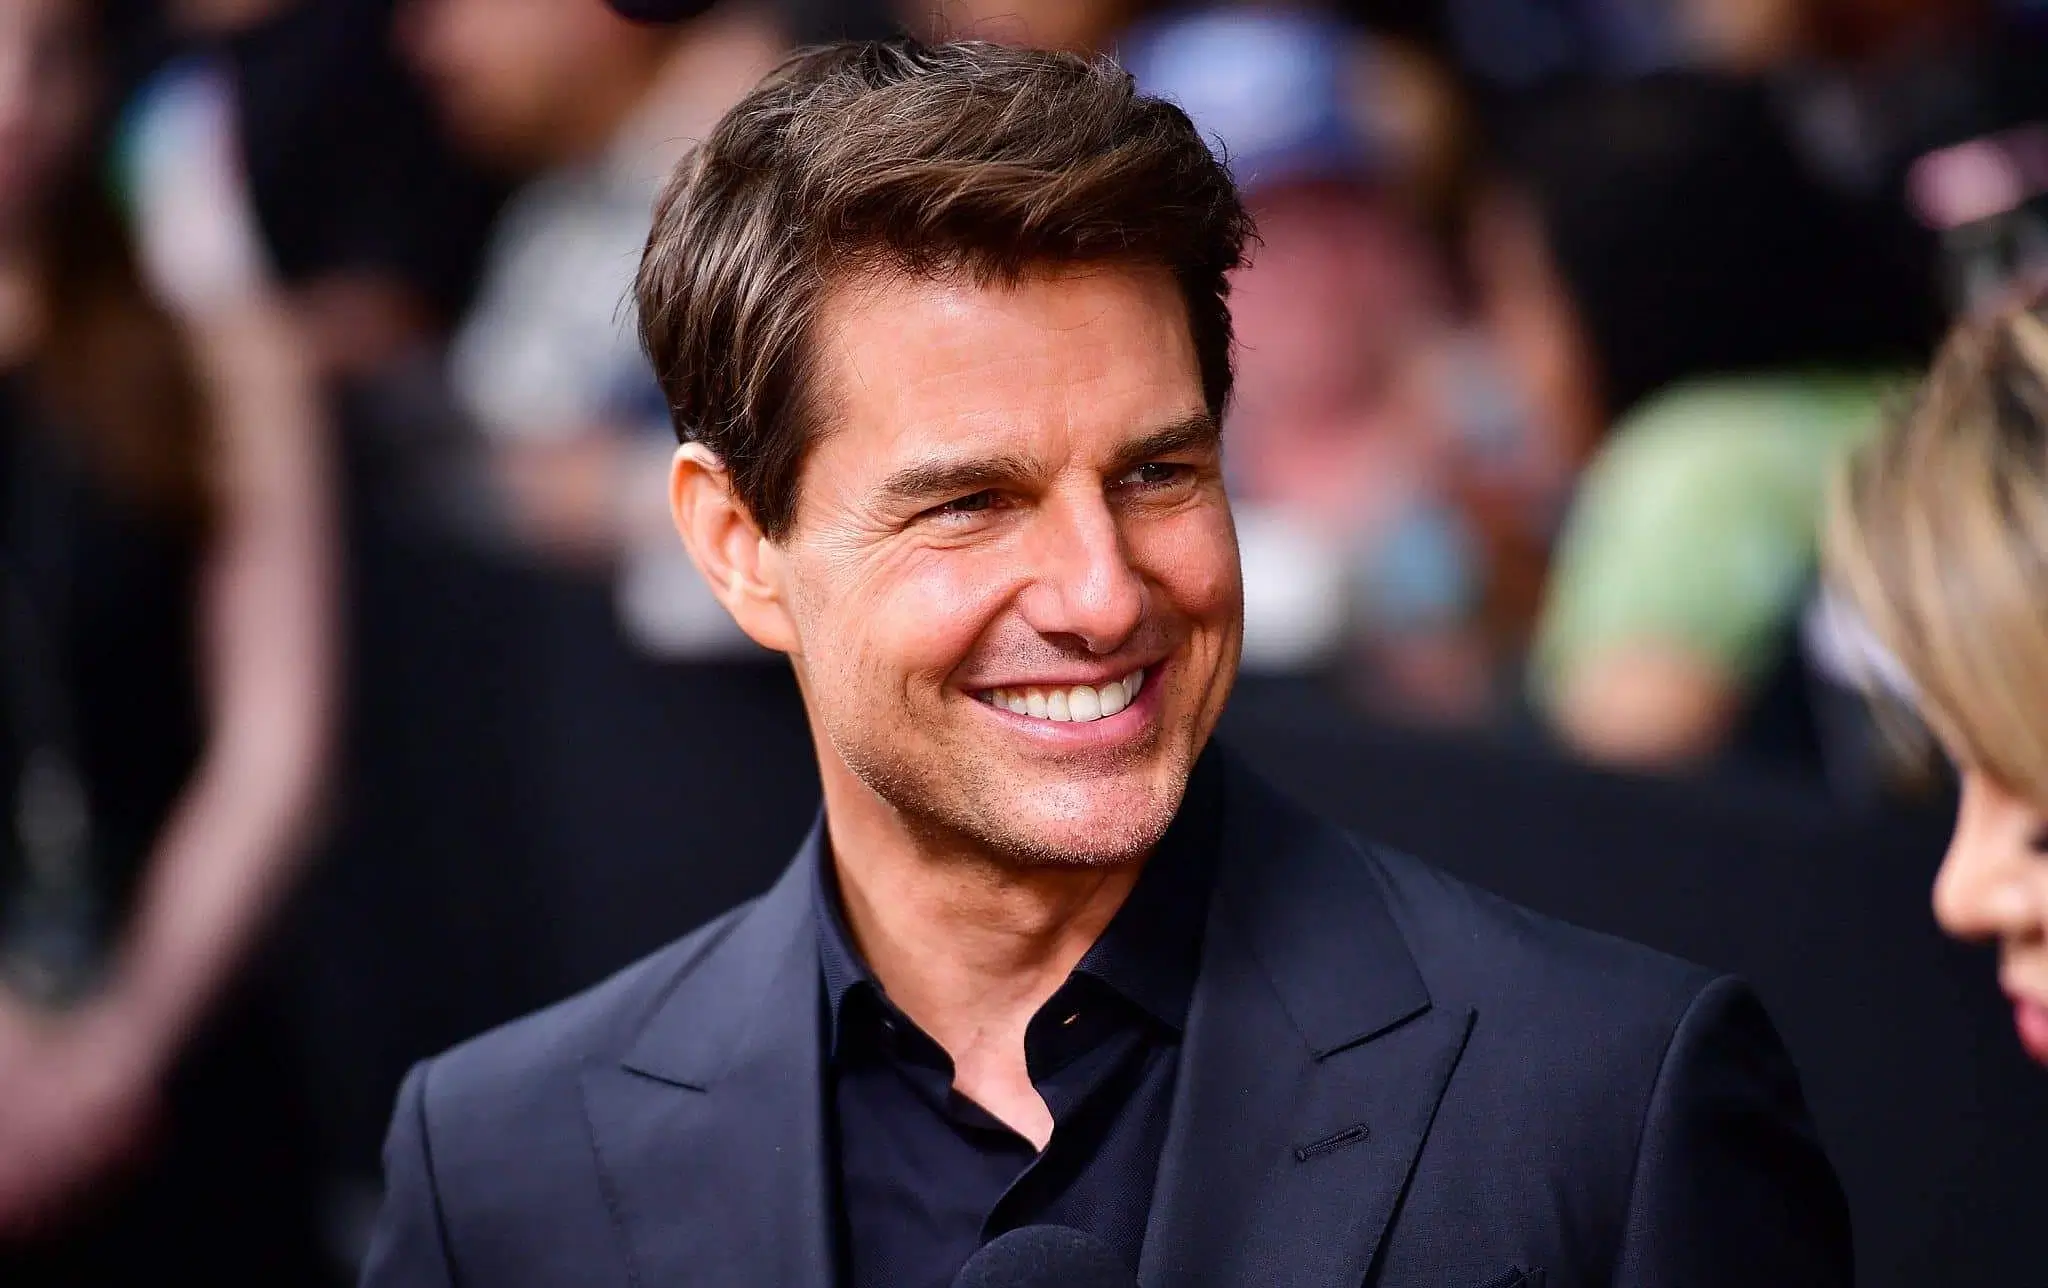 American actor and producer, Tom Cruise.